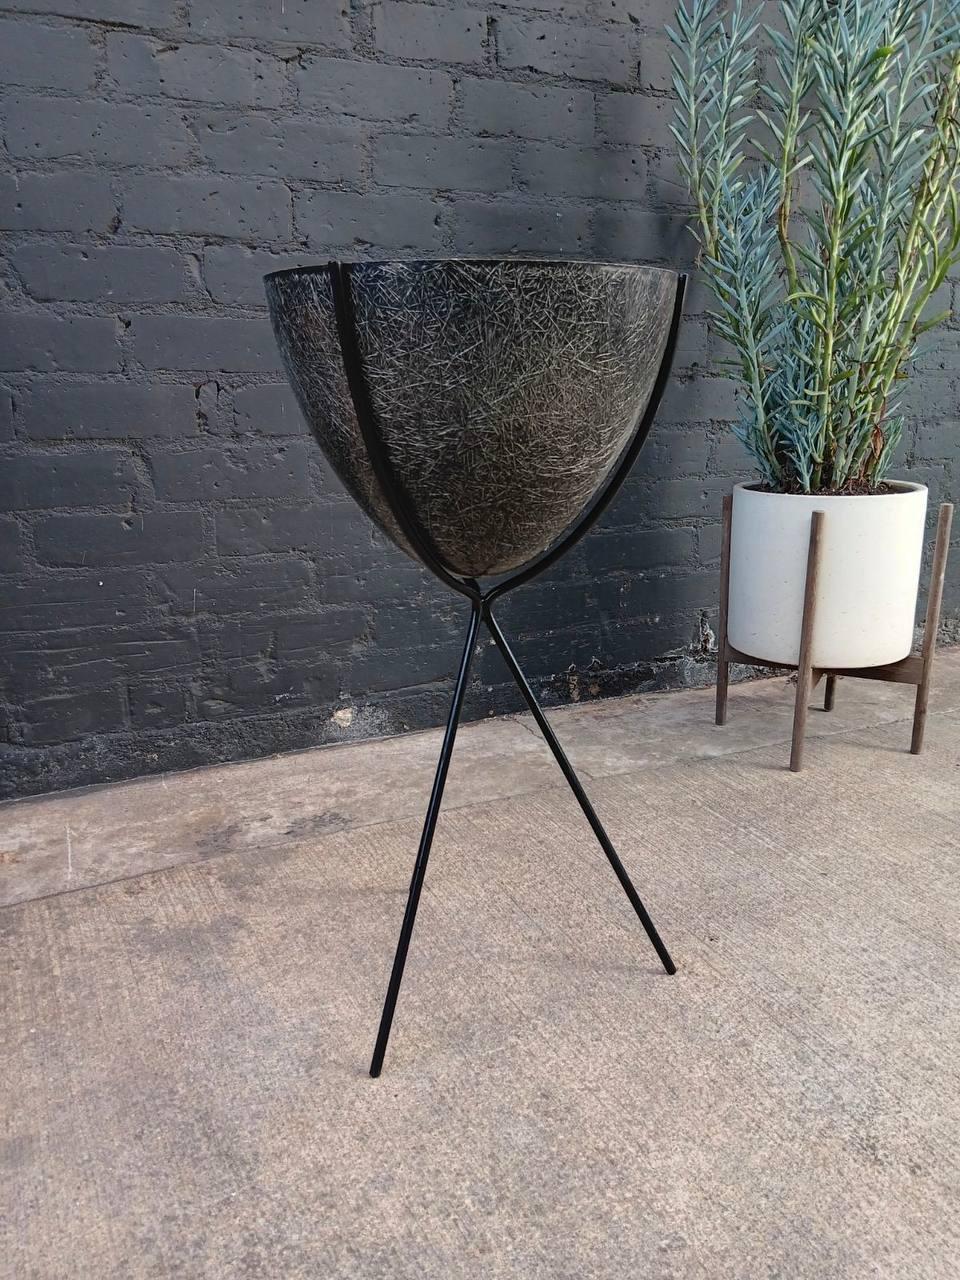 American Mid-Century Modern Floating Fiberglass Tripod Planter by Kimball Corp For Sale